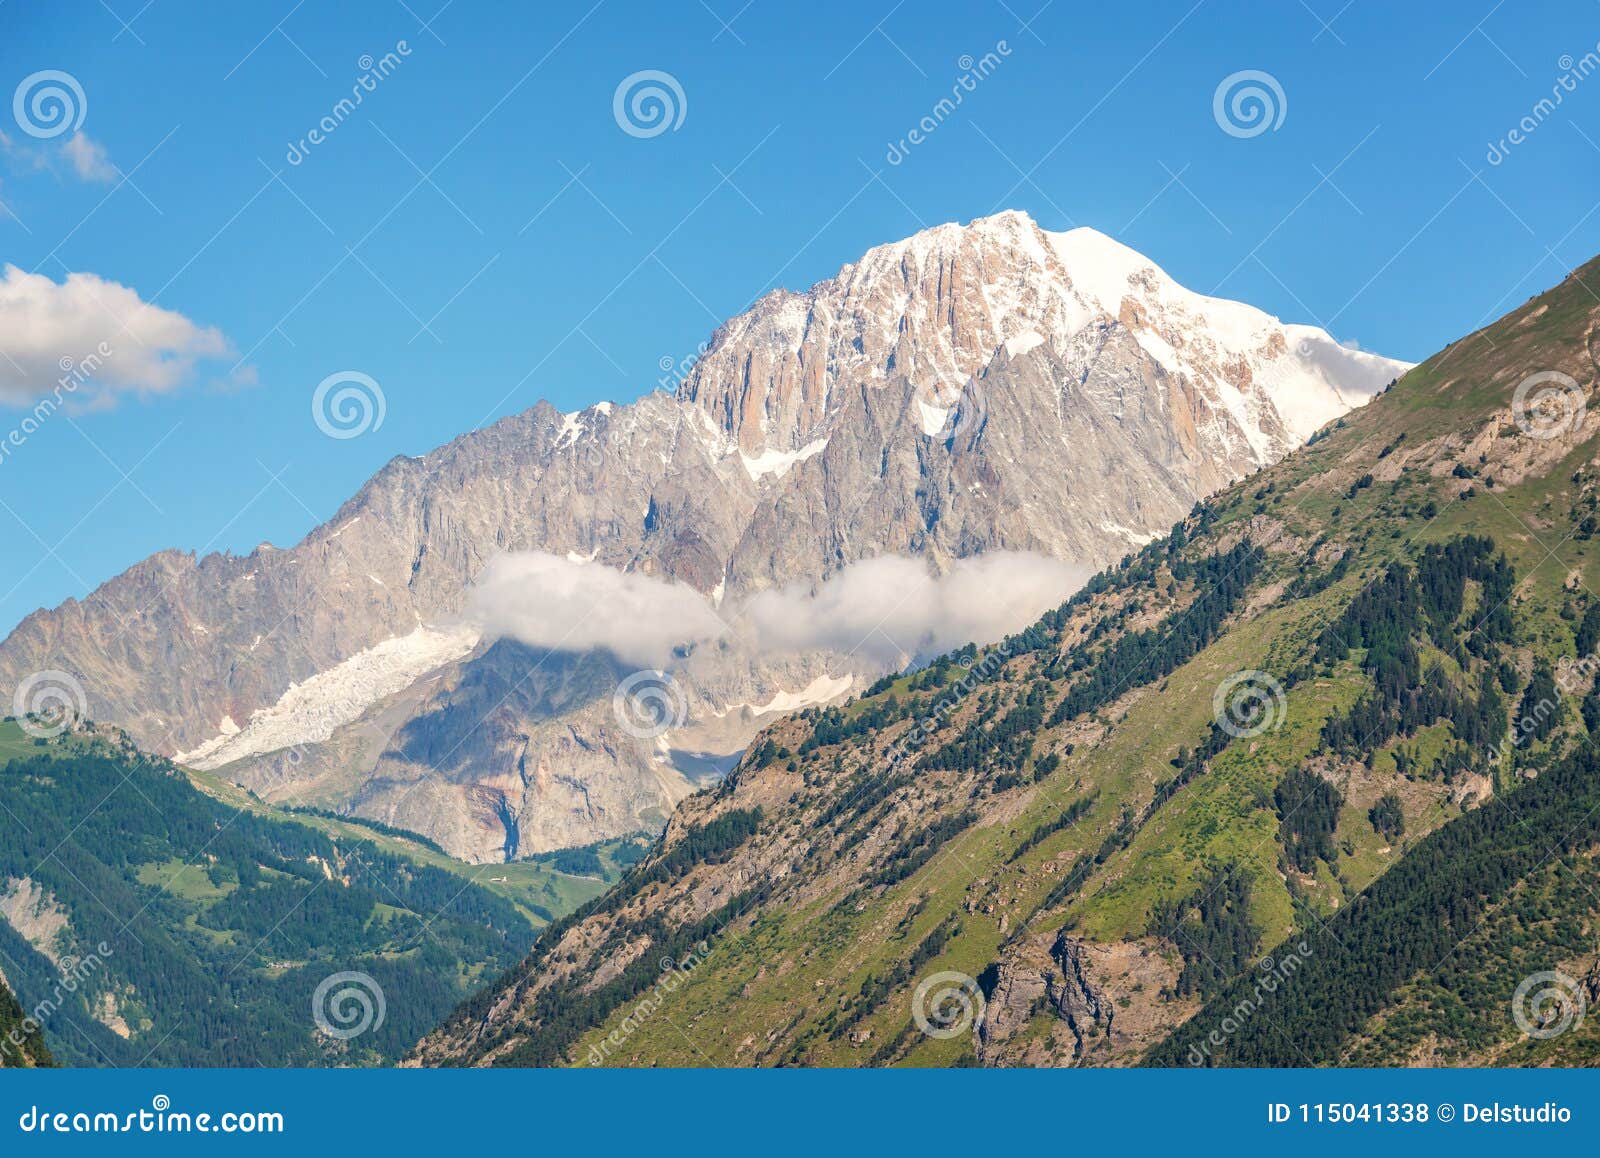 monte bianco mont blanc in the background view from aosta valley italy